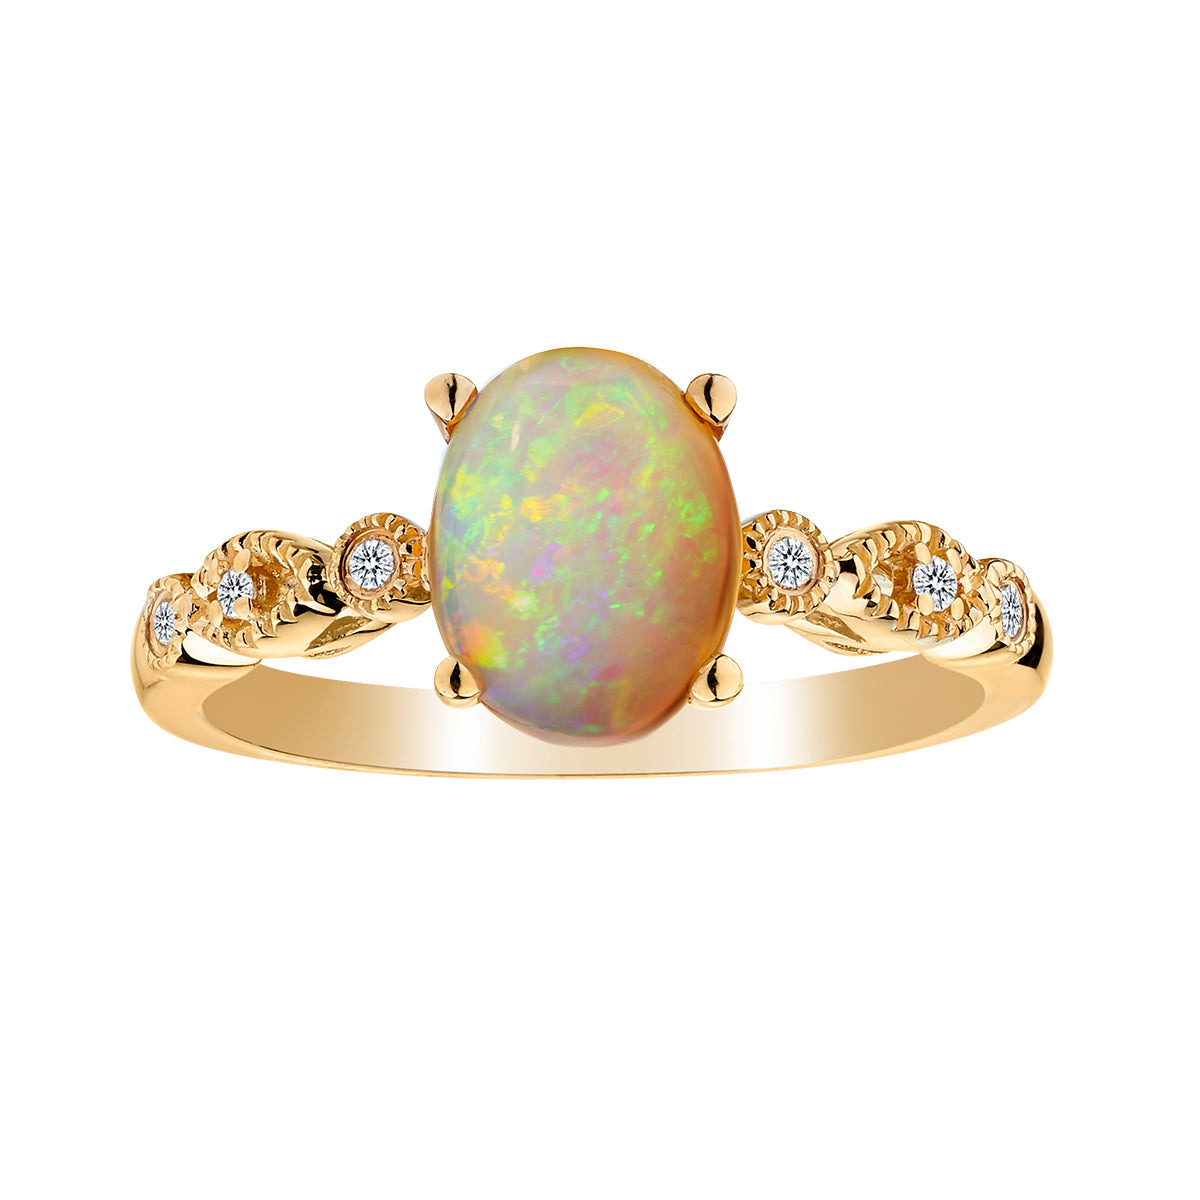 1.30 Carat Genuine Ethiopian Opal and .05 Carat Diamond Ring,  10kt Yellow Gold. Gemstone Rings. Griffin Jewellery Designs